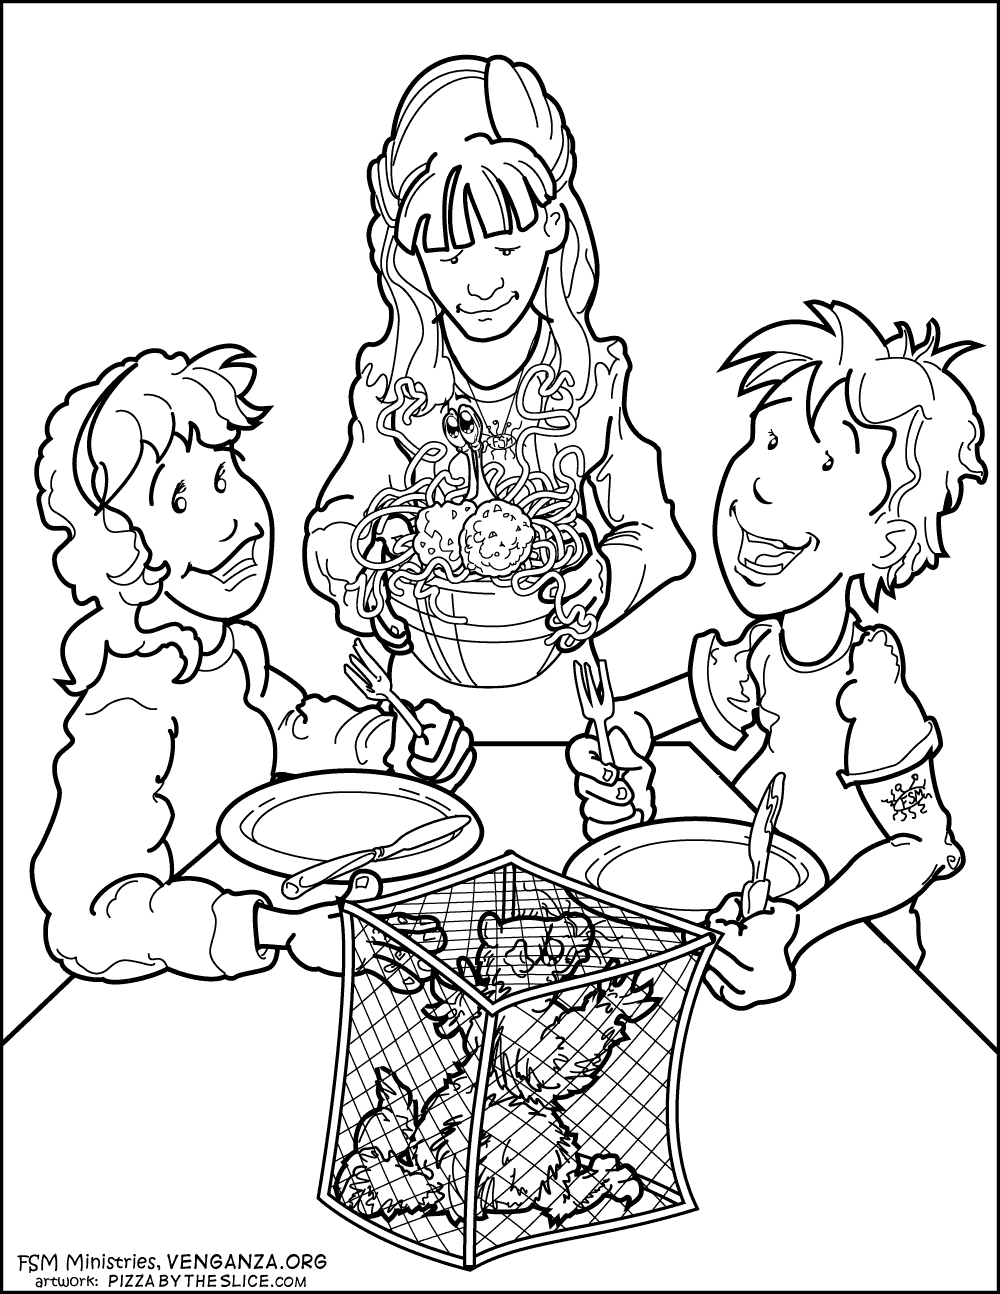 Sharing Coloring Pages For Kids